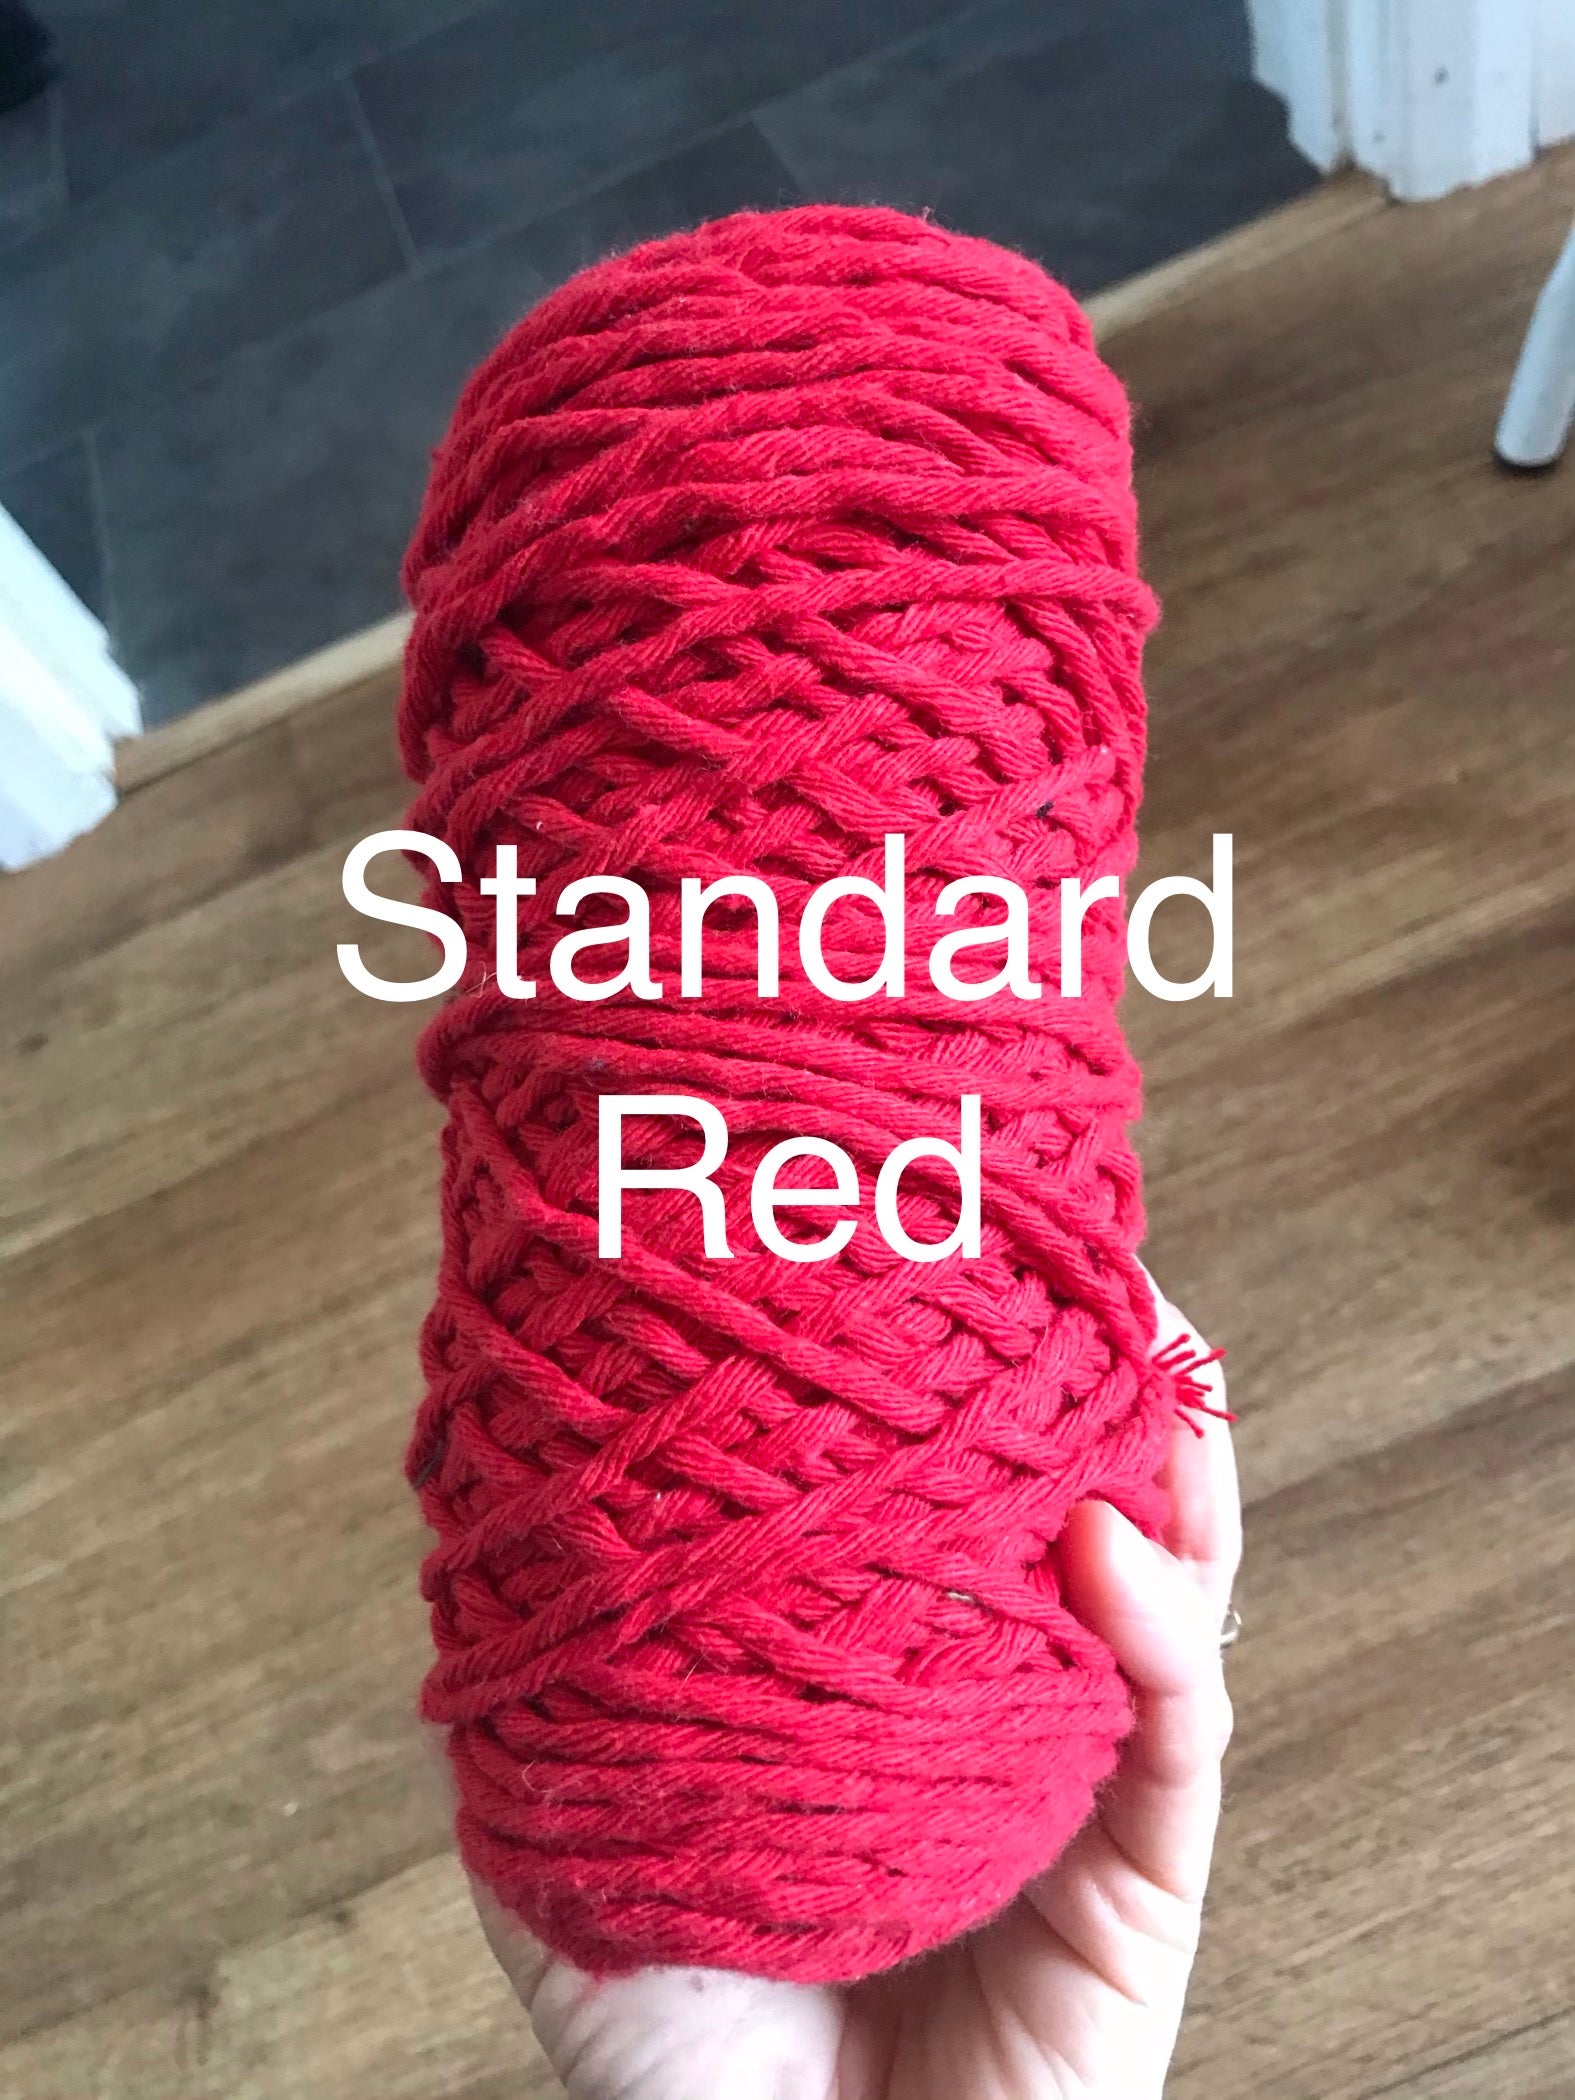 Macra-Made With Love sitar wall hanger red yarn stock image